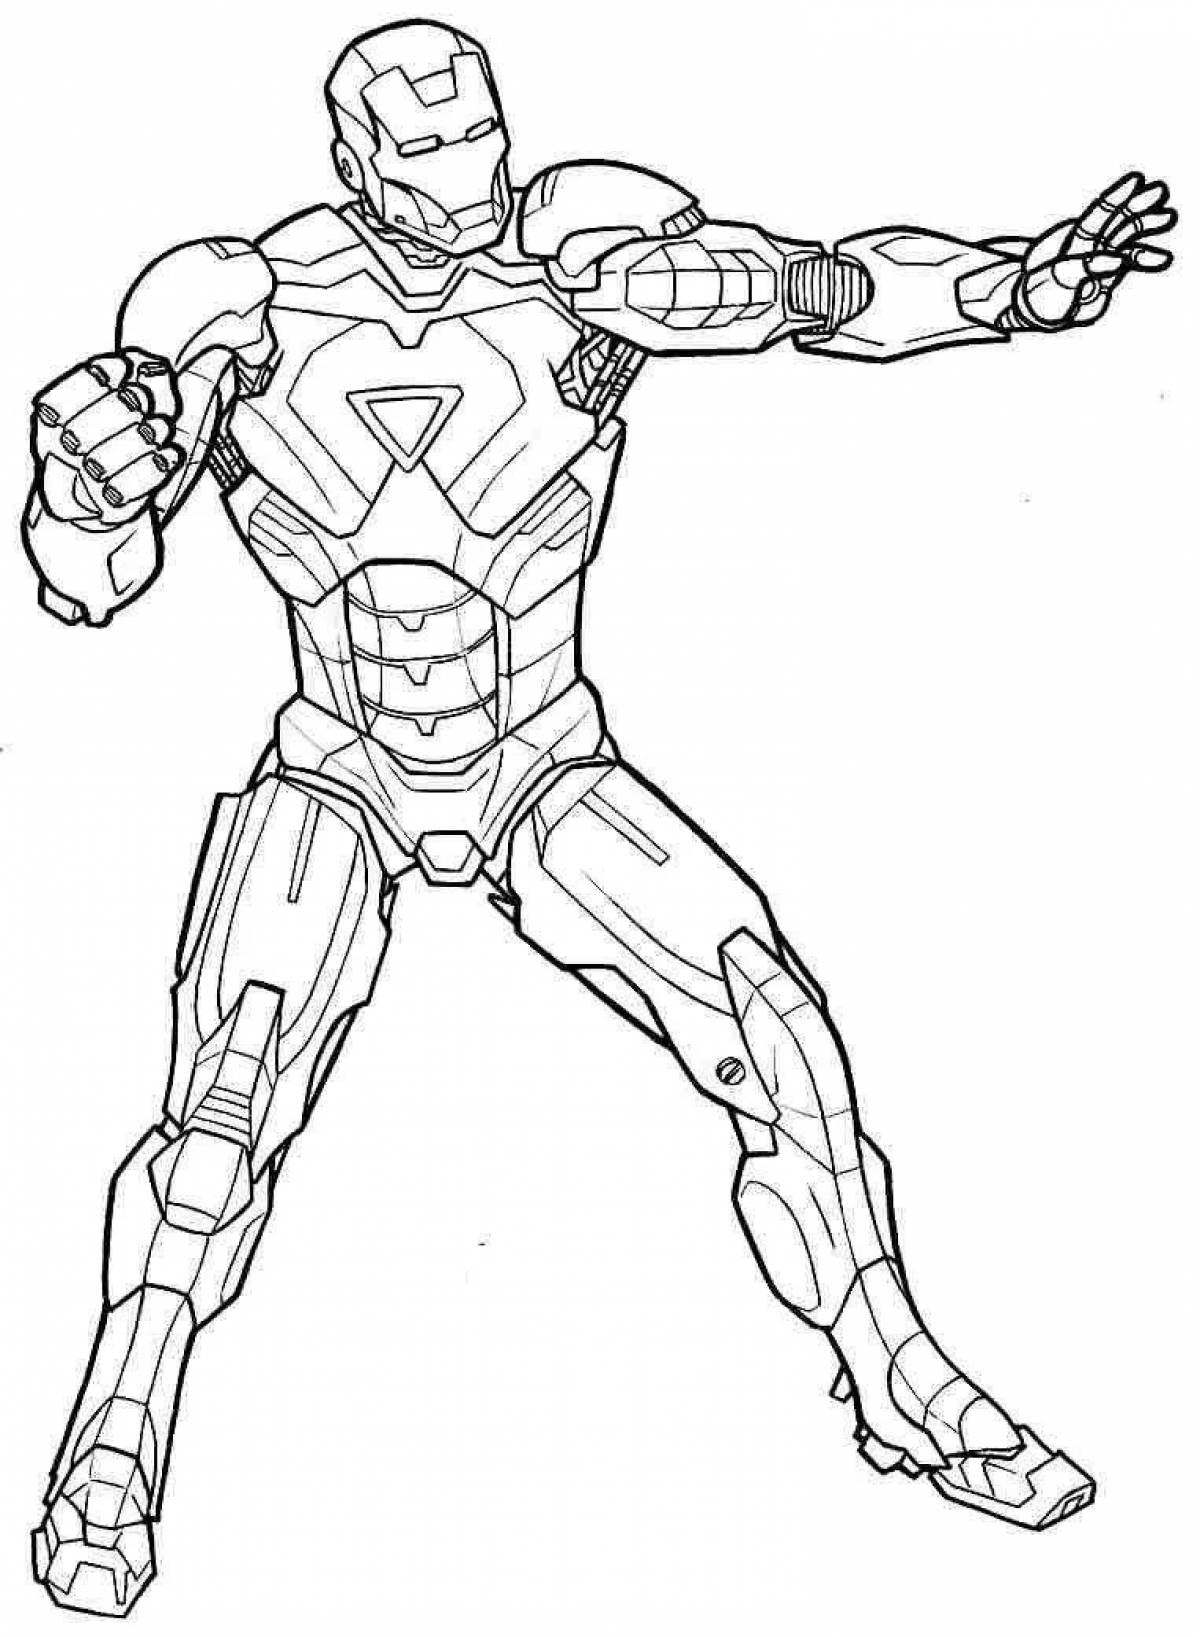 Dazzling Iron coloring page